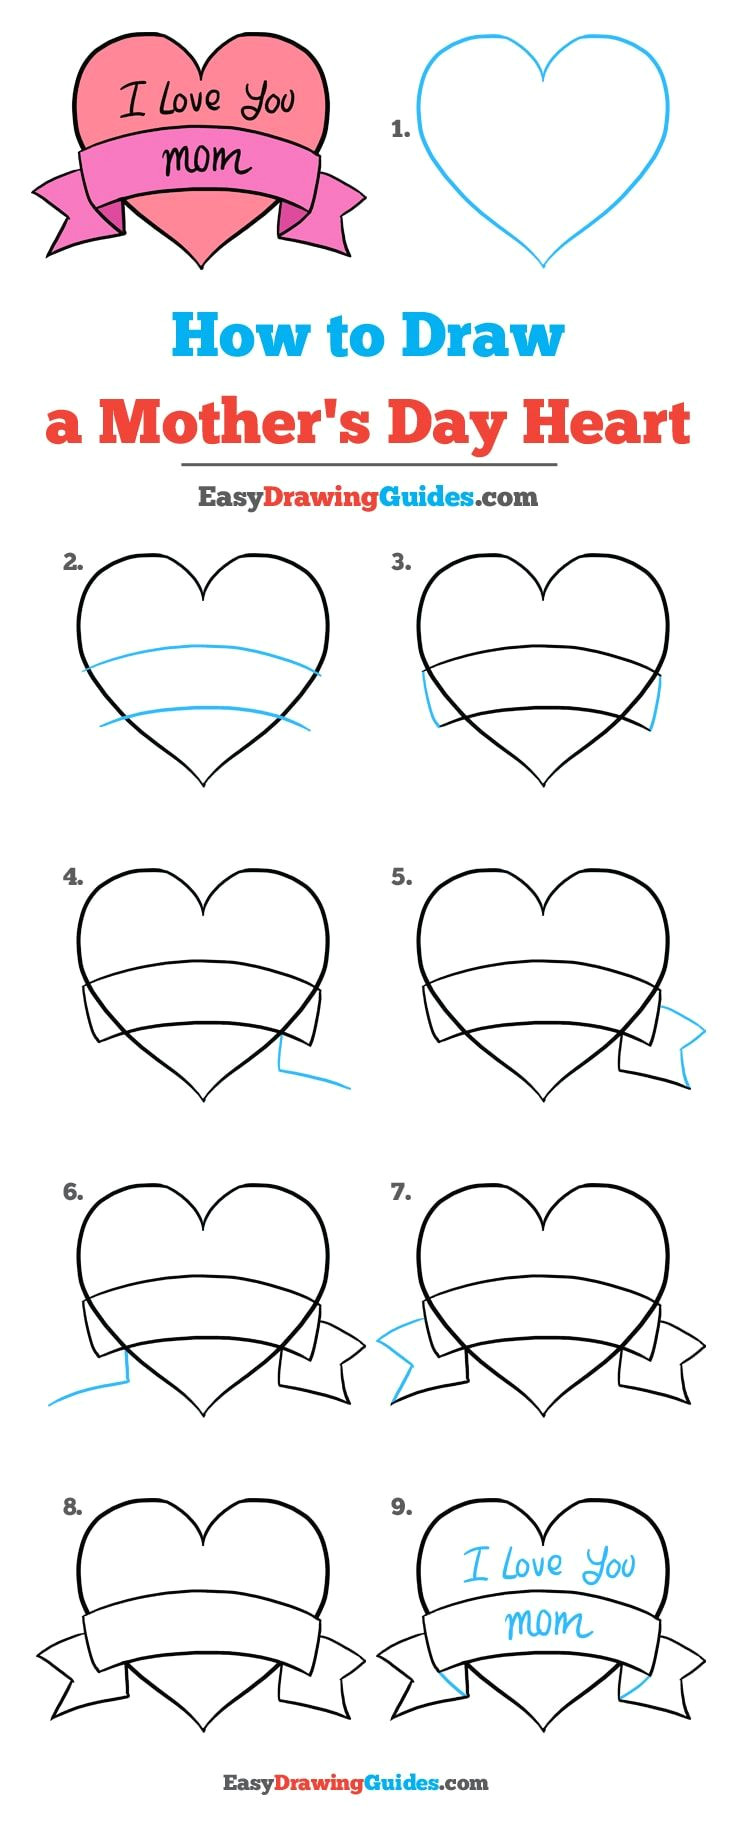 Easy Drawings for 12 Year Olds Step by Step How to Draw A Mother S Day Heart Really Easy Drawing Tutorial